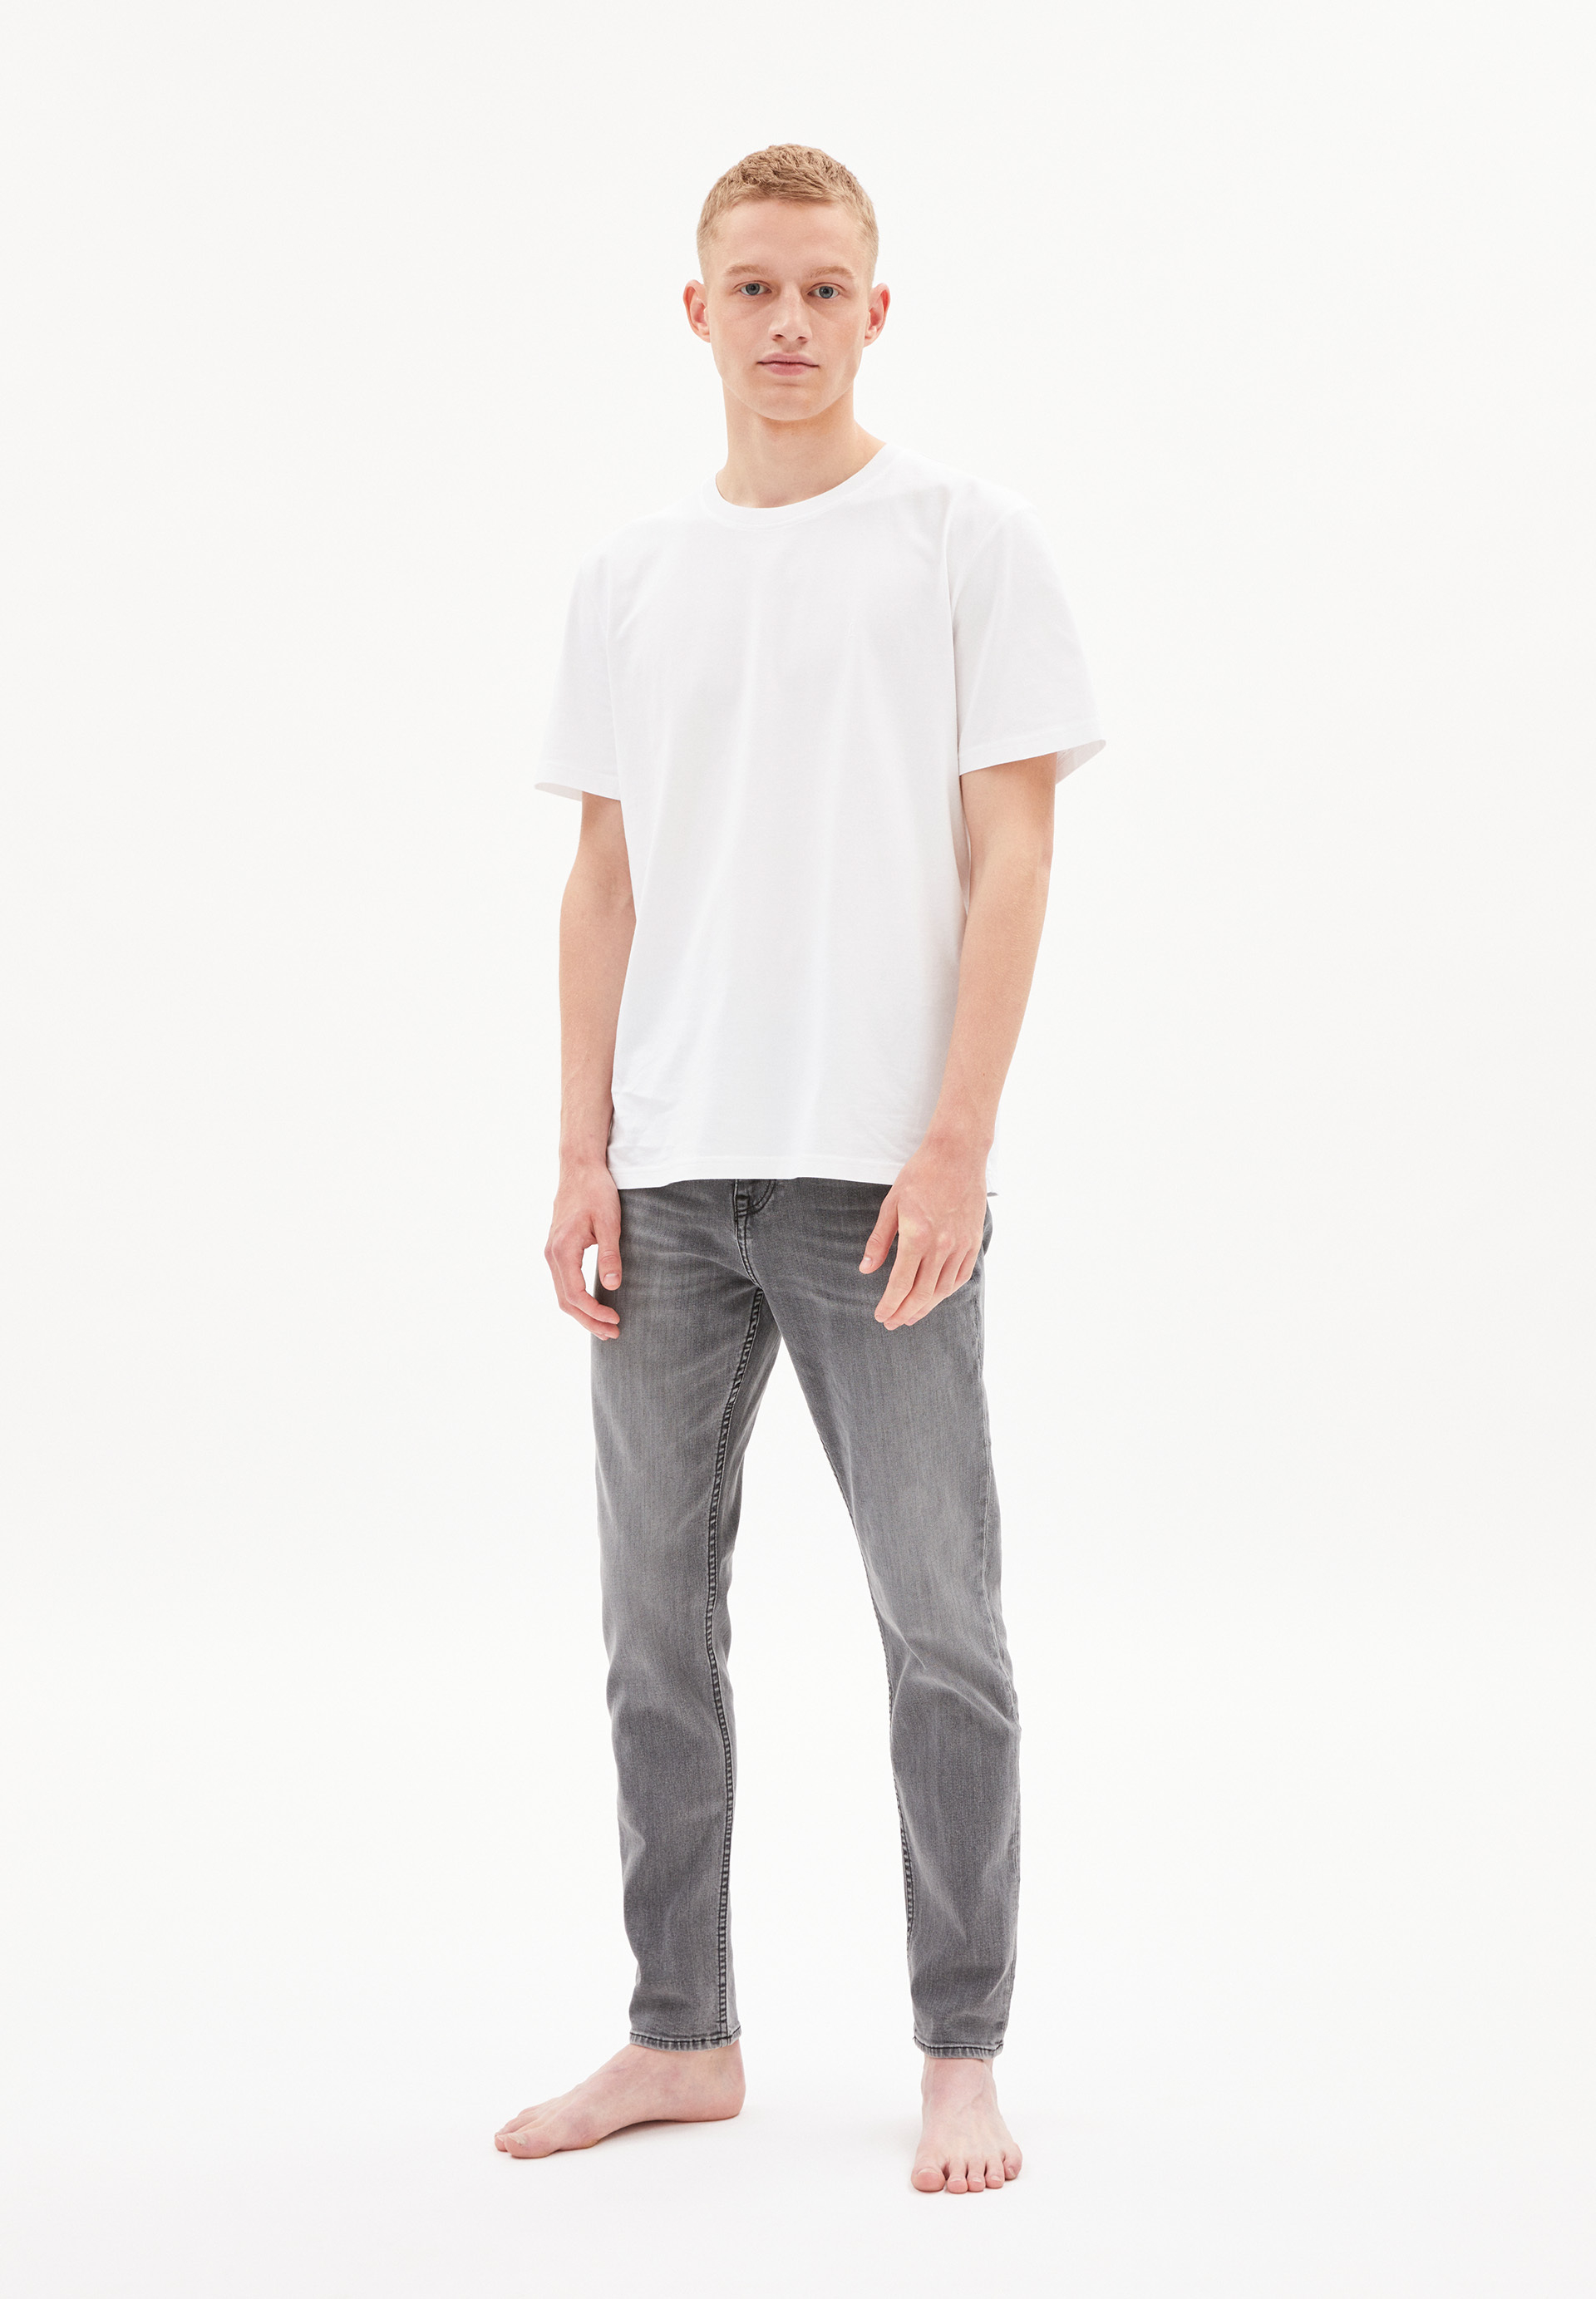 AARO Tapered Fit Denim made of Organic Cotton Mix